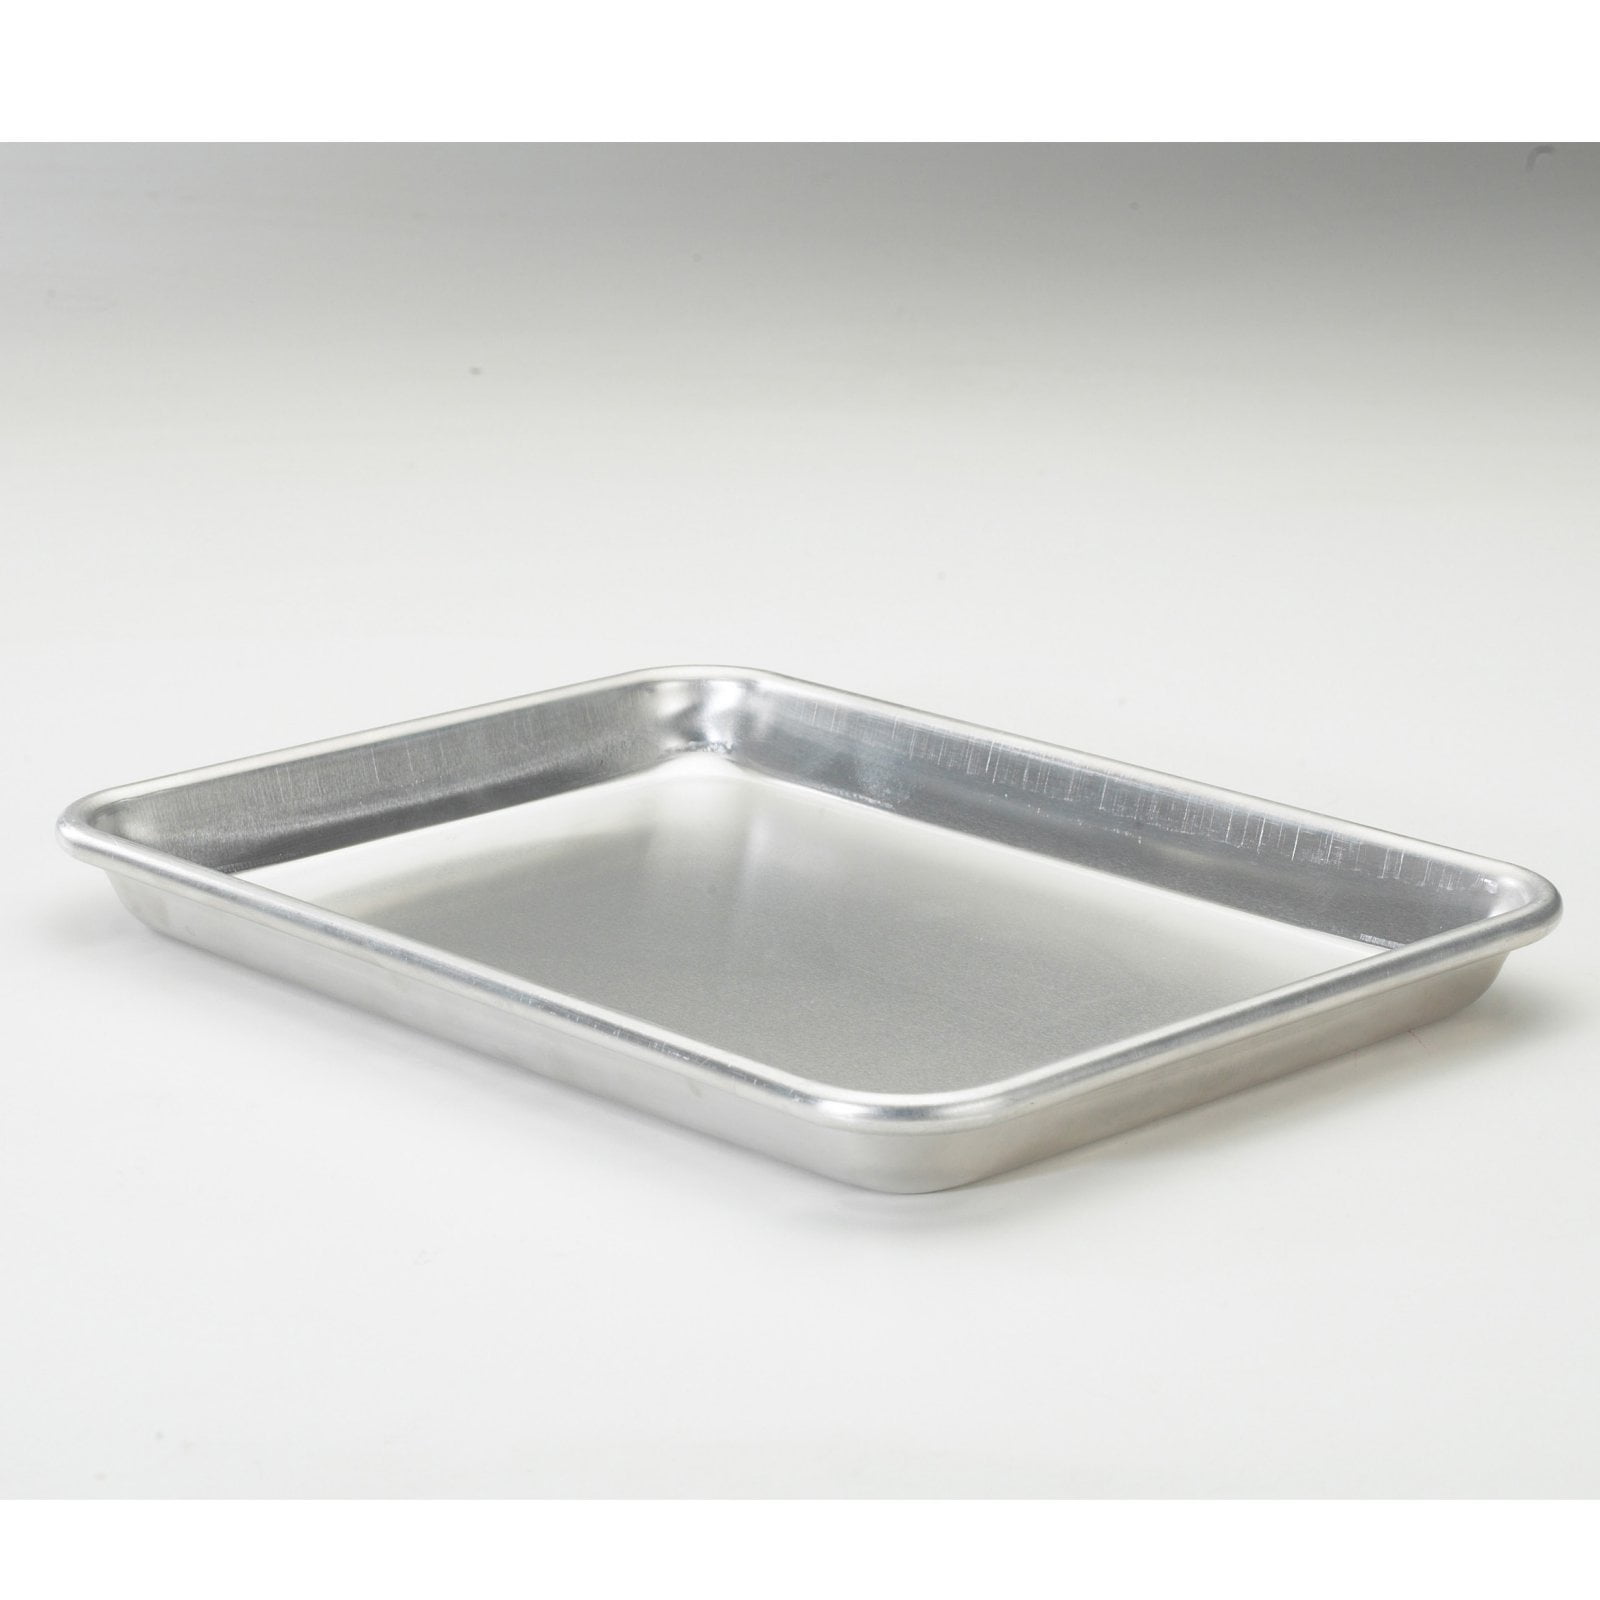 Rimmed Baking Sheet, 9-Inch by 13-Inch